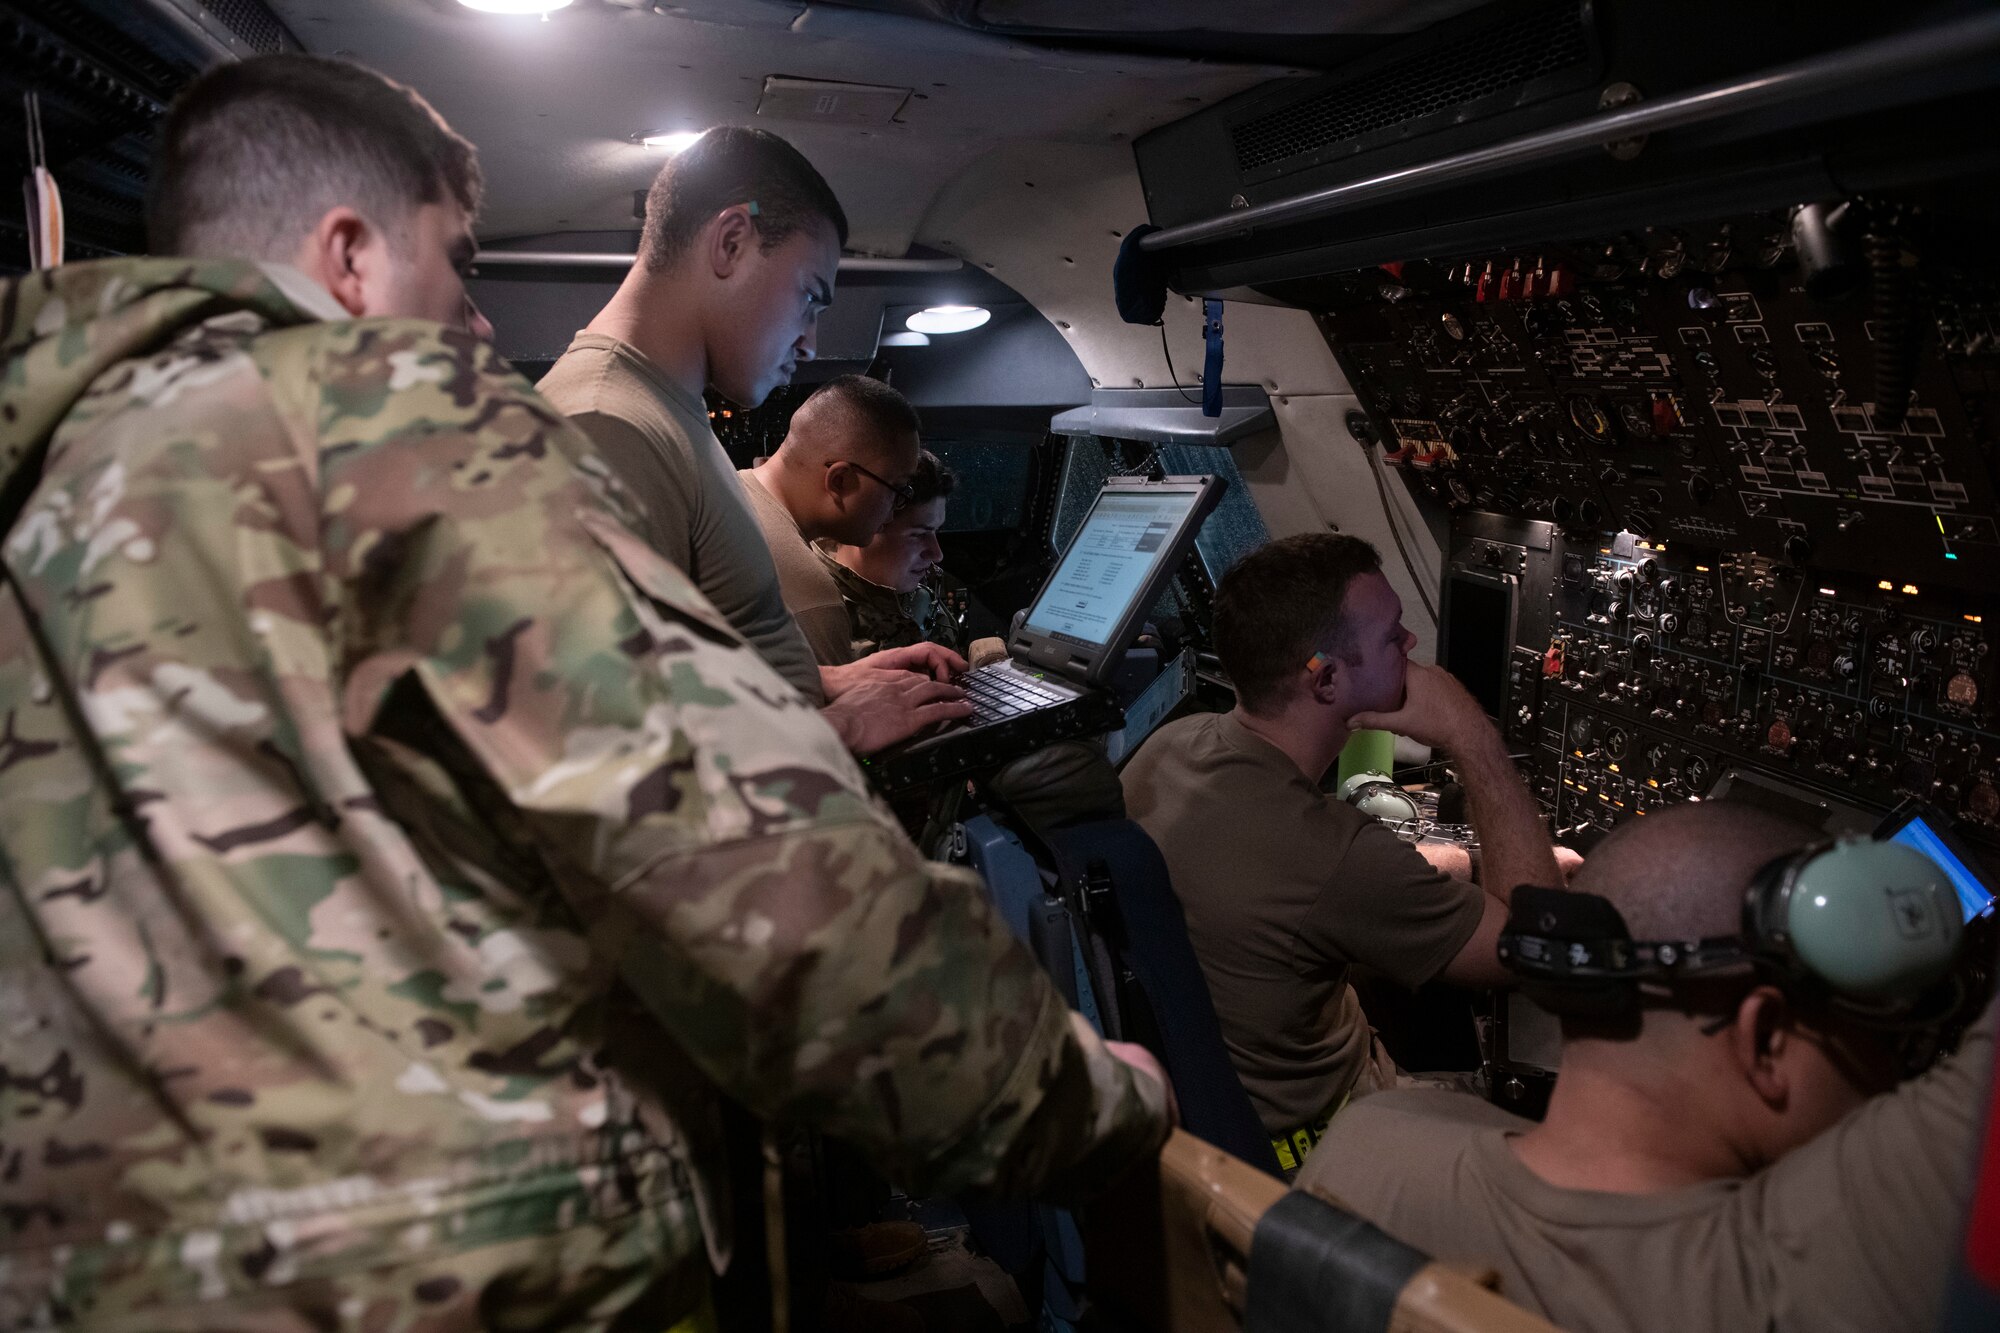 730th Air Mobility Squadron members learn about fuel control on a C-5M Super Galaxy at Yokota Air Base, Japan, Sept. 15, 2021. The 730th AMS was able to acquire a C-5M from Travis Air Force Base in Fairchild, California, to use for familiarization training. (U.S. Air Force photo by Staff Sgt. Joshua Edwards)